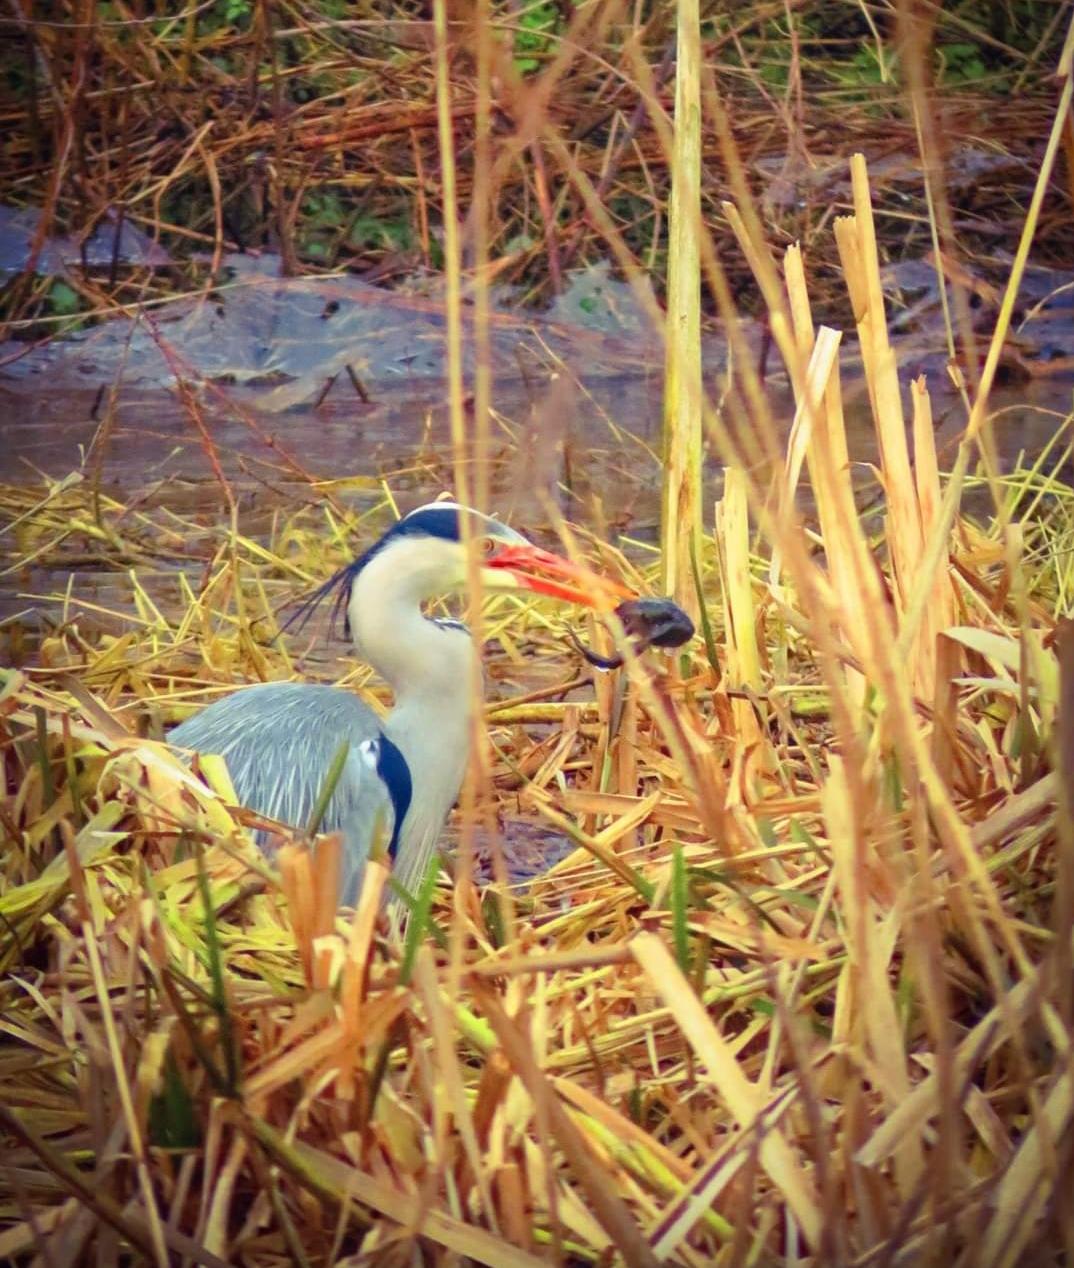 Heron at Rockwell. Photo by Kylie Jackson.